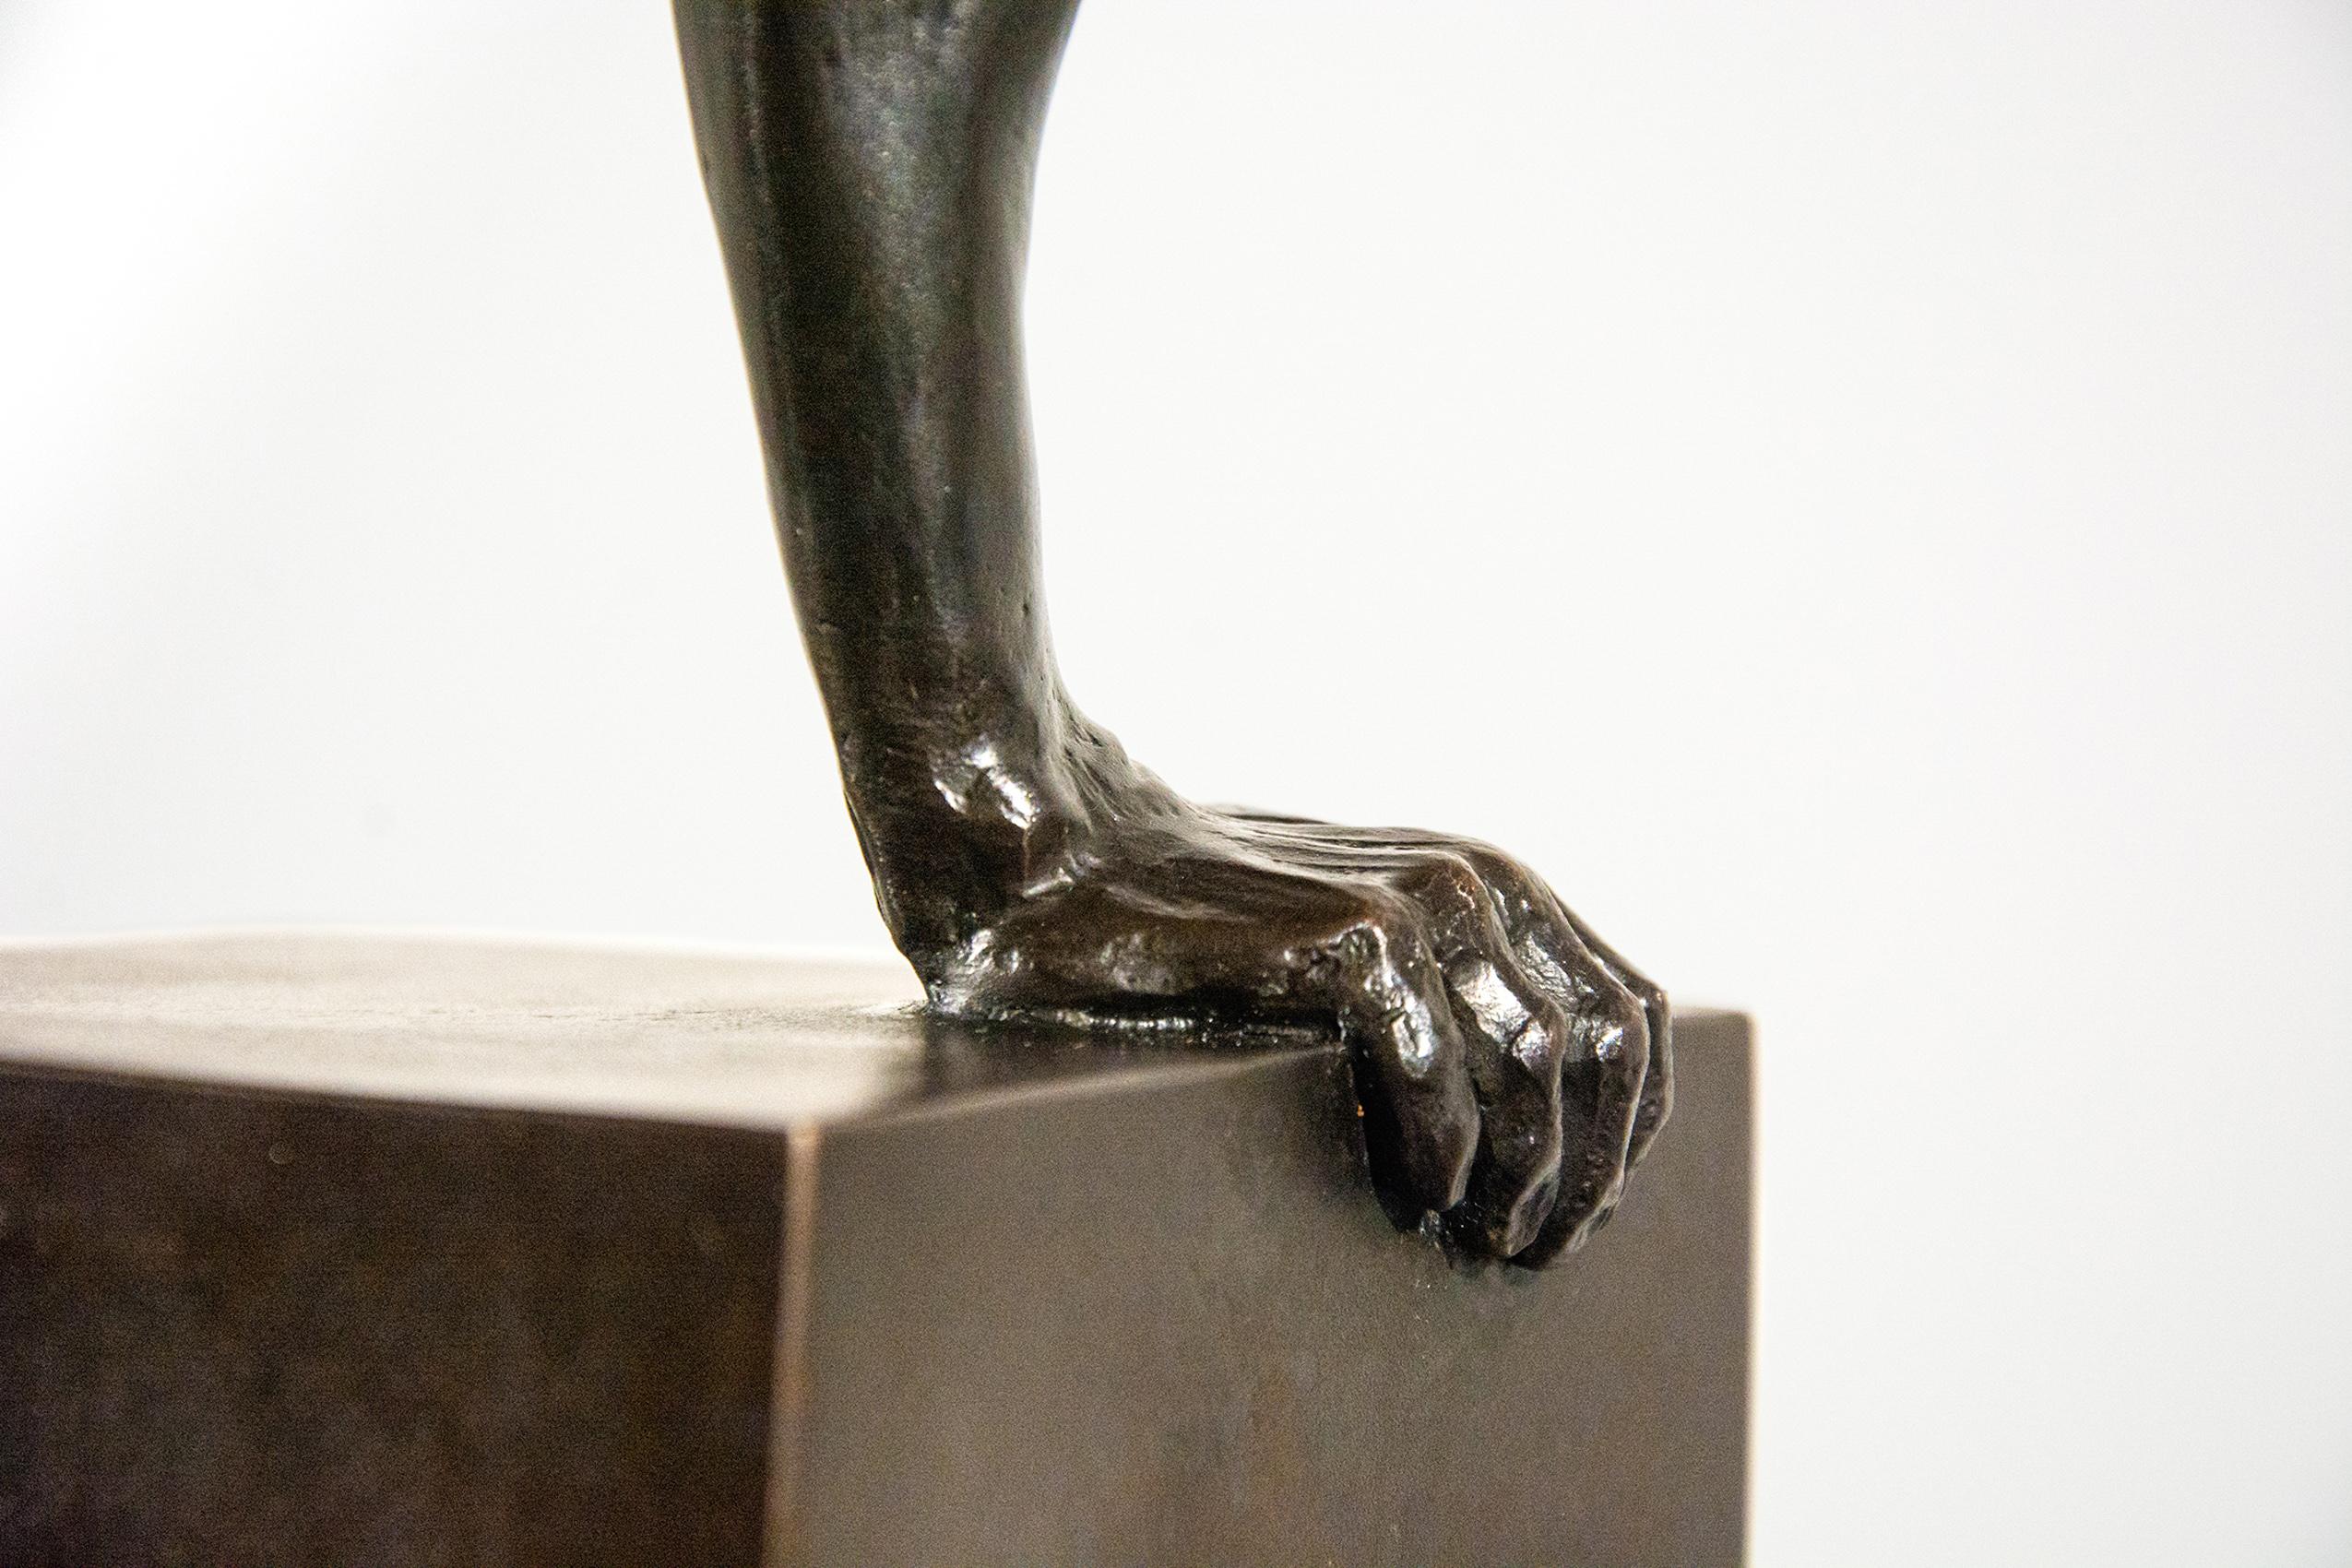 At once expressive, and elegant, William Hung creates dynamic sculptures that explore the human condition. With this intimate piece, cast in a rich bronze, an athlete balances on one hand, his nude, fit body appearing to be suspended in mid-air. The